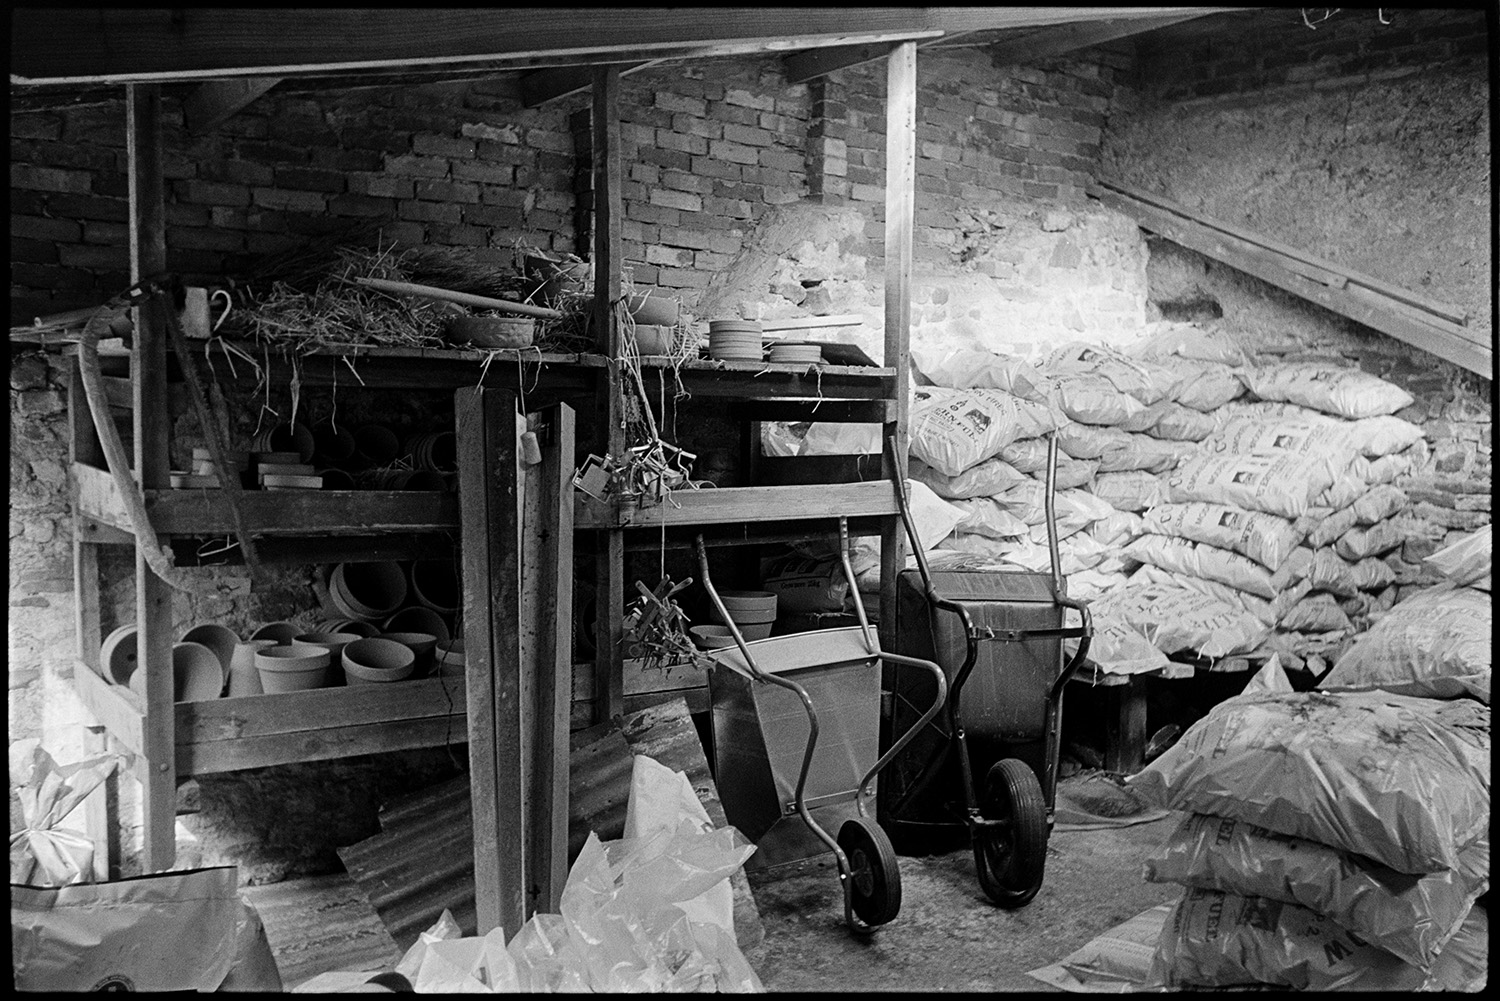 Interior of ironmongers shop, shelves with china, coal store. Proprietors at counter.
[Interior of the coal store at Ellacott's ironmongery in Market Street, Hatherleigh. There are two wheelbarrows, wooden shelving with plant pots and garden goods, alongside a stack of plastic sacks of coal.]